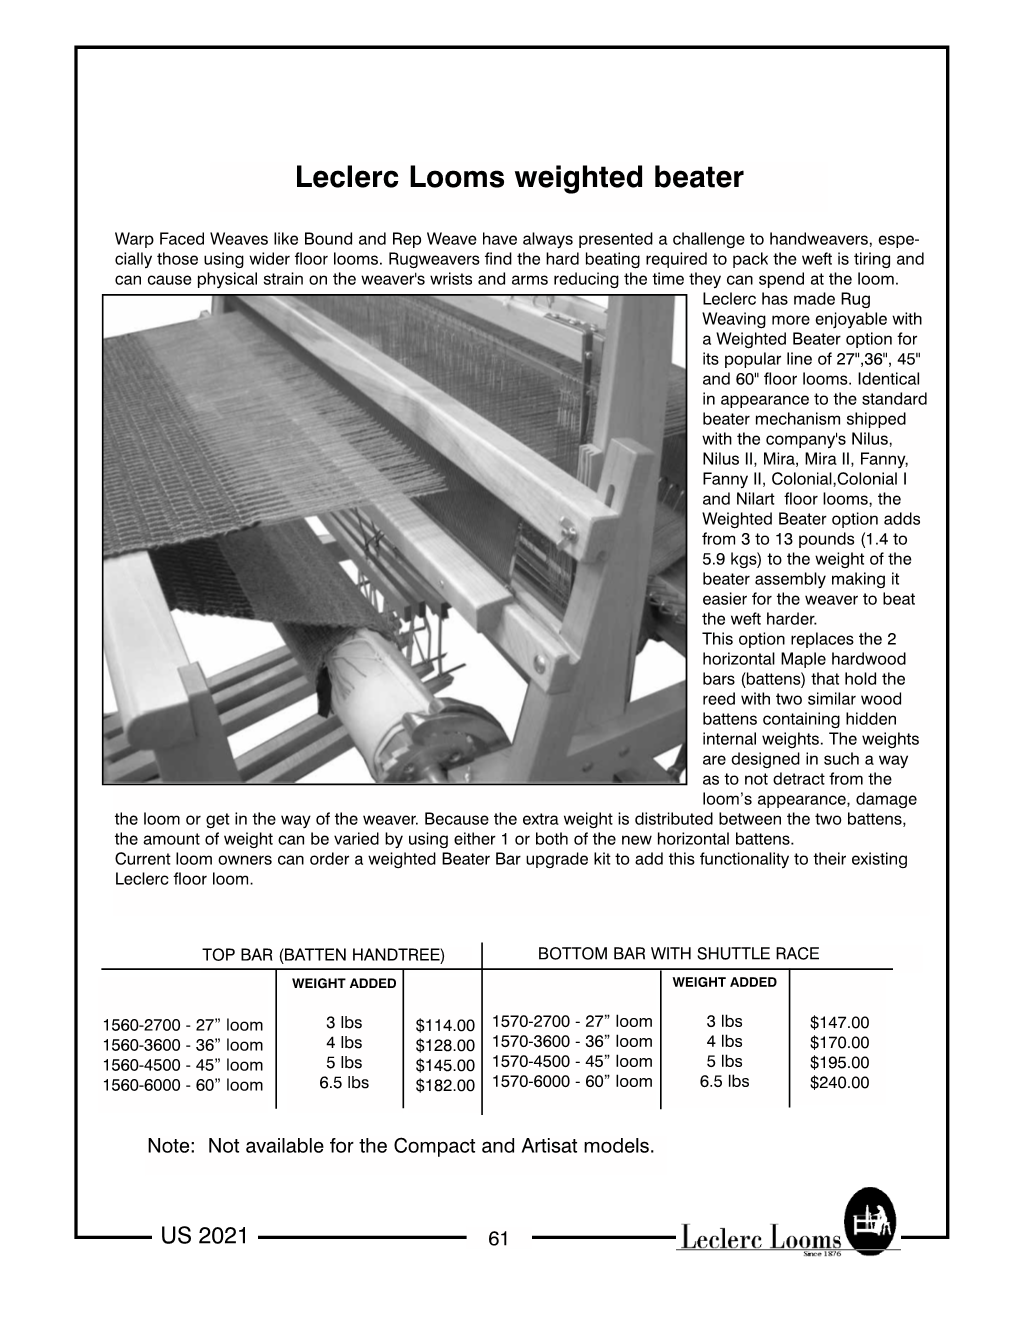 Leclerc Looms Weighted Beater